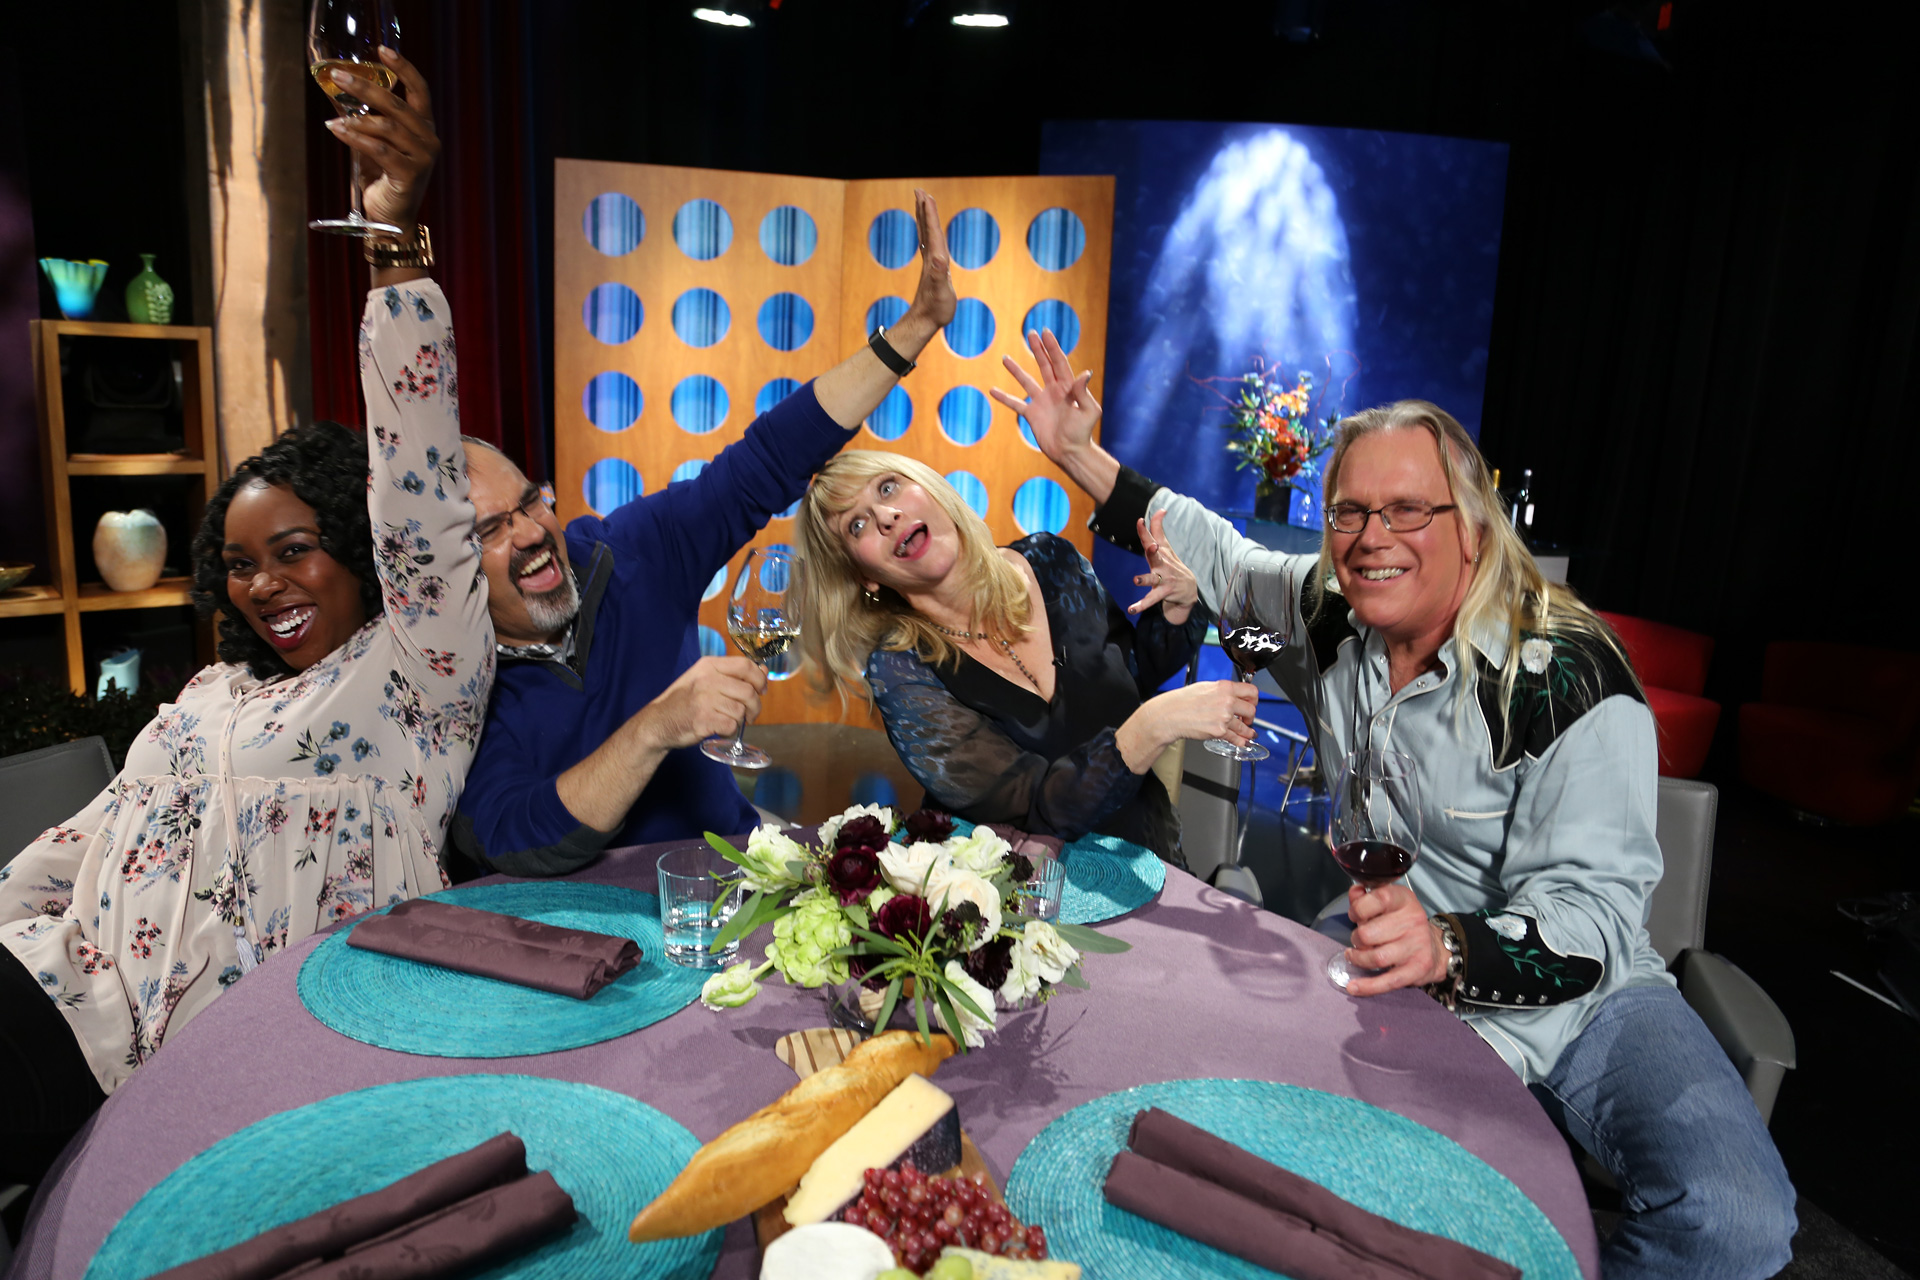 Host Leslie Sbrocco and guests having fun on the set of season 12 episode 7.